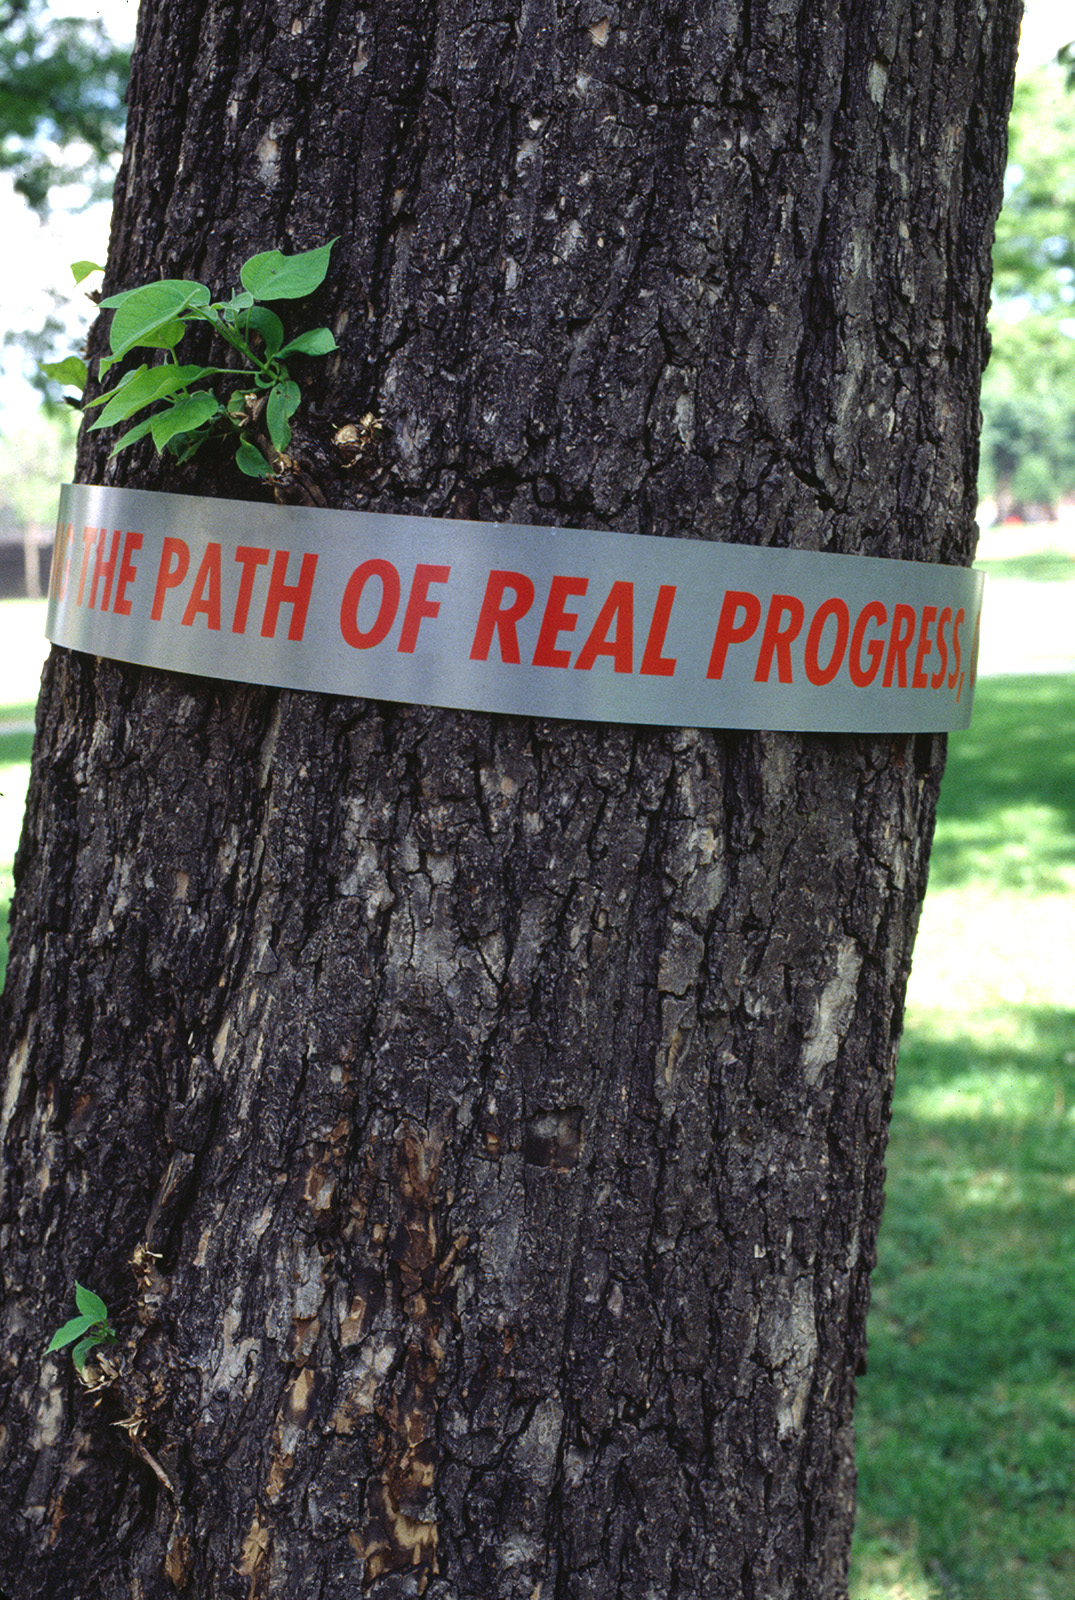  “The Path of Real Progress,” tree band, An American Garden 1995-1996 